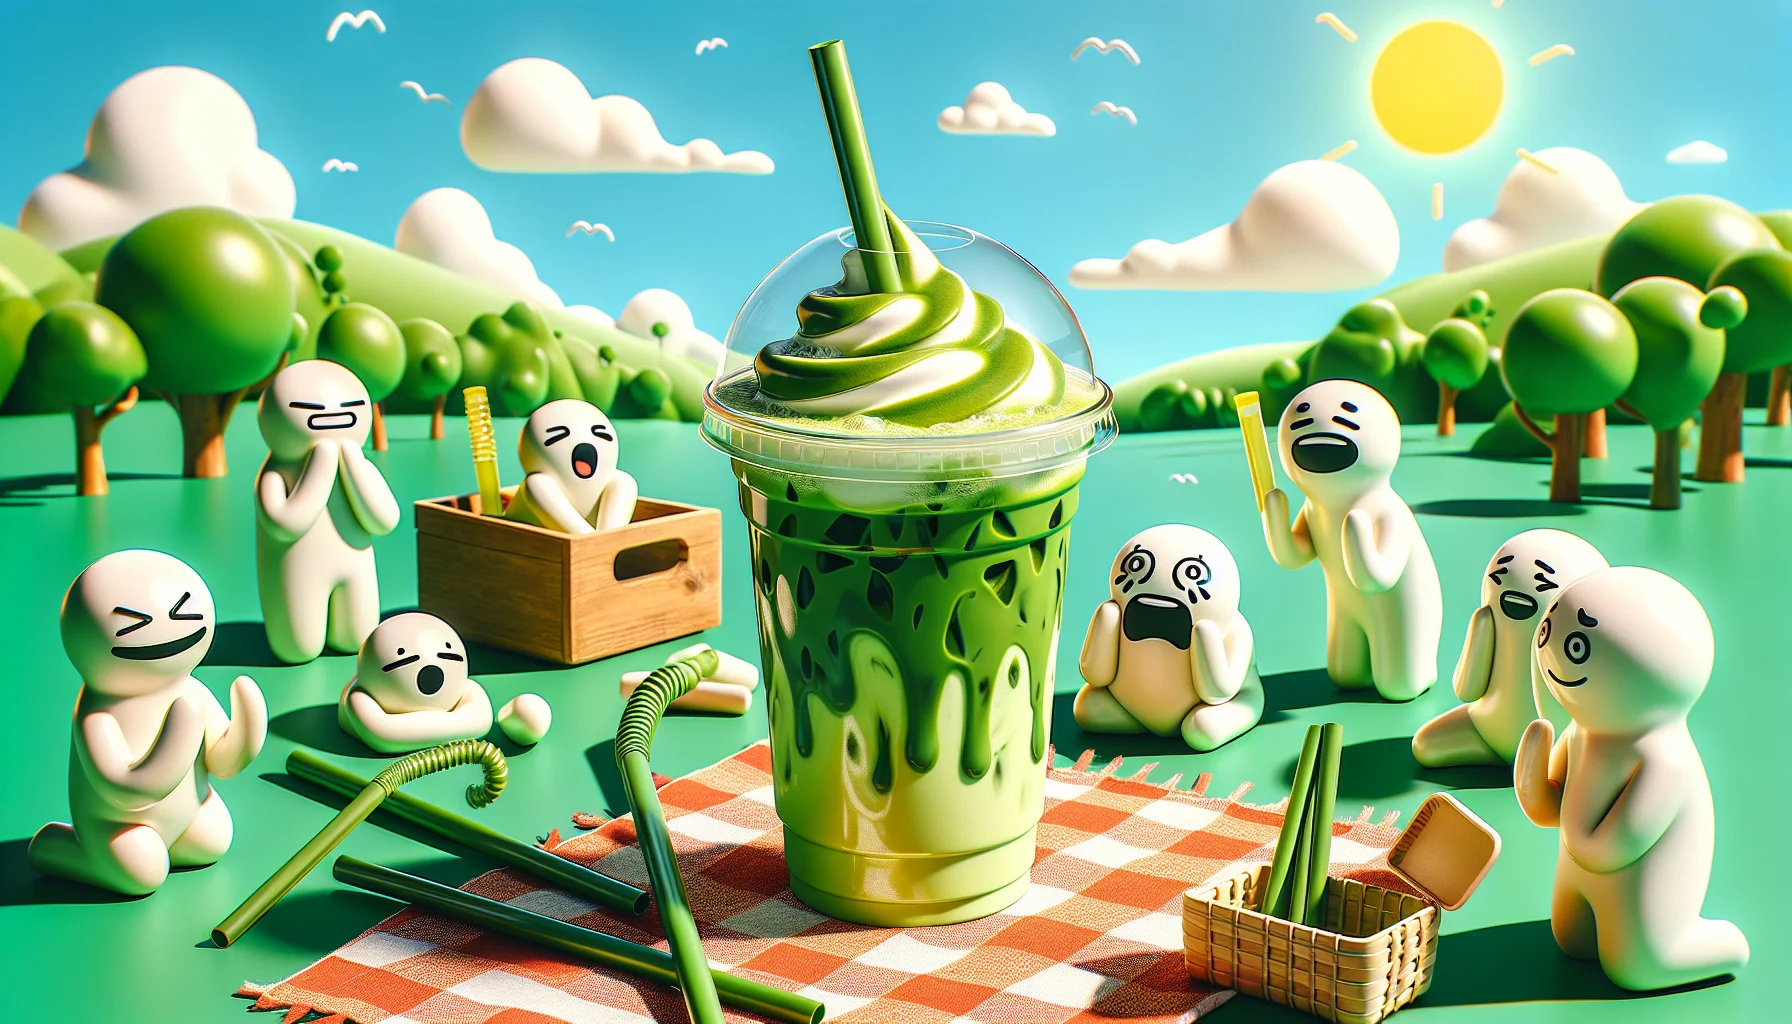 Create an image of a playful scene where an iced matcha latte, complete with a vibrant green hue and a creamy swirl, sits front and center on a picnic blanket. Around it, there are abstract figures displaying humorous expressions of anticipation and longing, each with a reusable straw in hand. In the background, there's a bright sunny day with a clear, blue sky and lush green trees suggesting an ideal environment for a refreshing break. The entire scene conveys a sense of light-hearted fun, beckoning viewers to partake in the joy of enjoying an iced matcha latte.